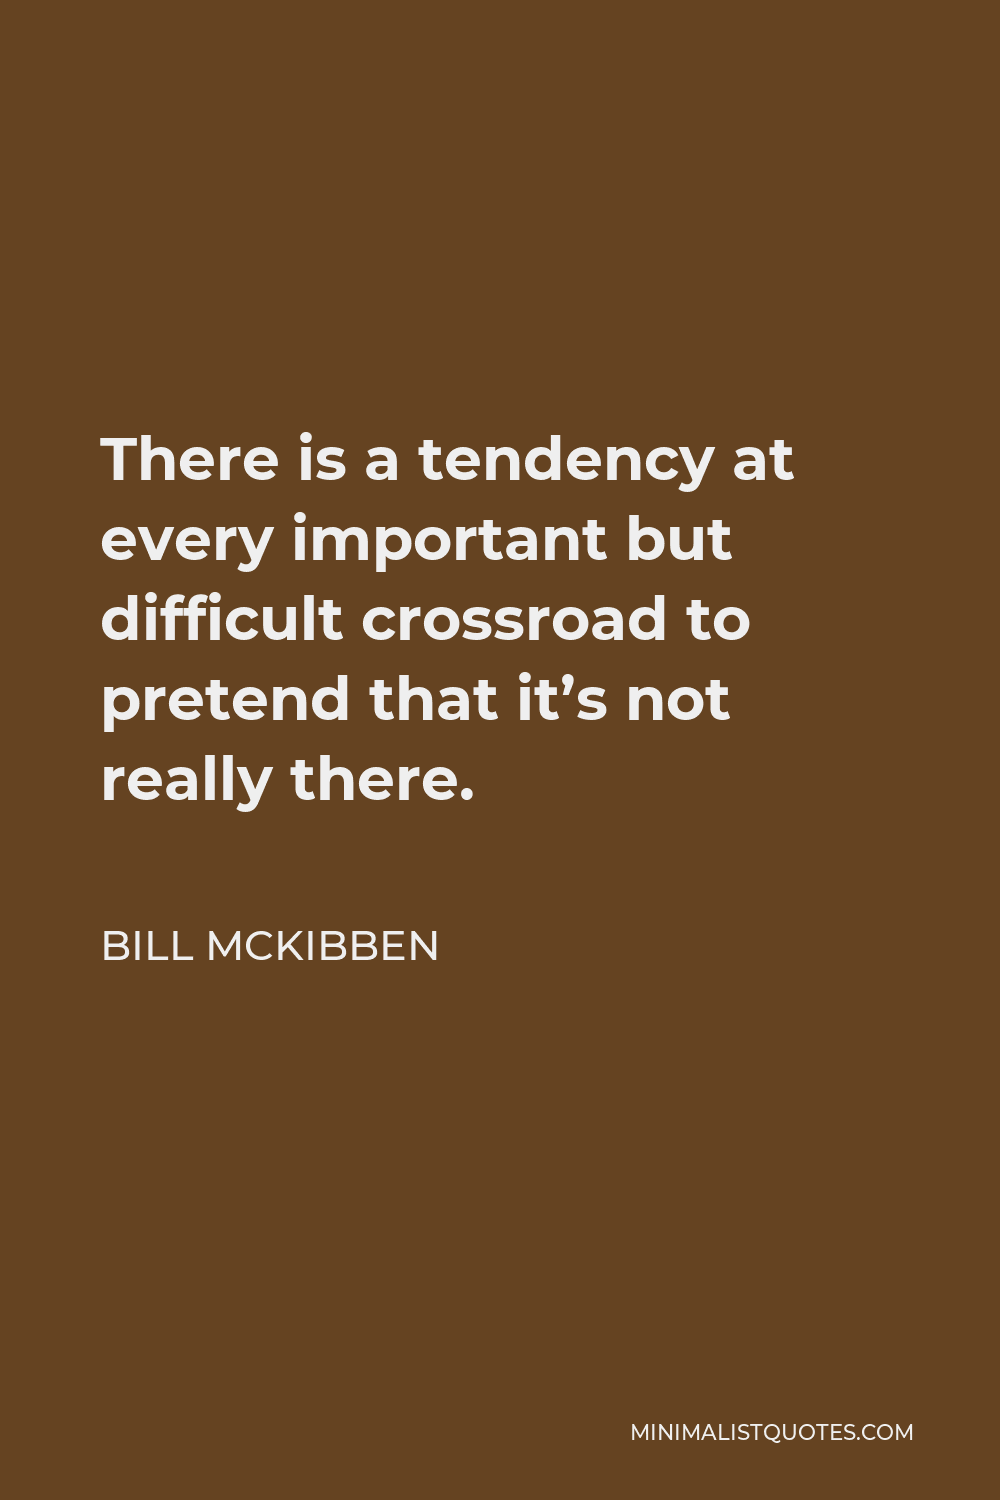 Bill McKibben Quote - There is a tendency at every important but difficult crossroad to pretend that it’s not really there.